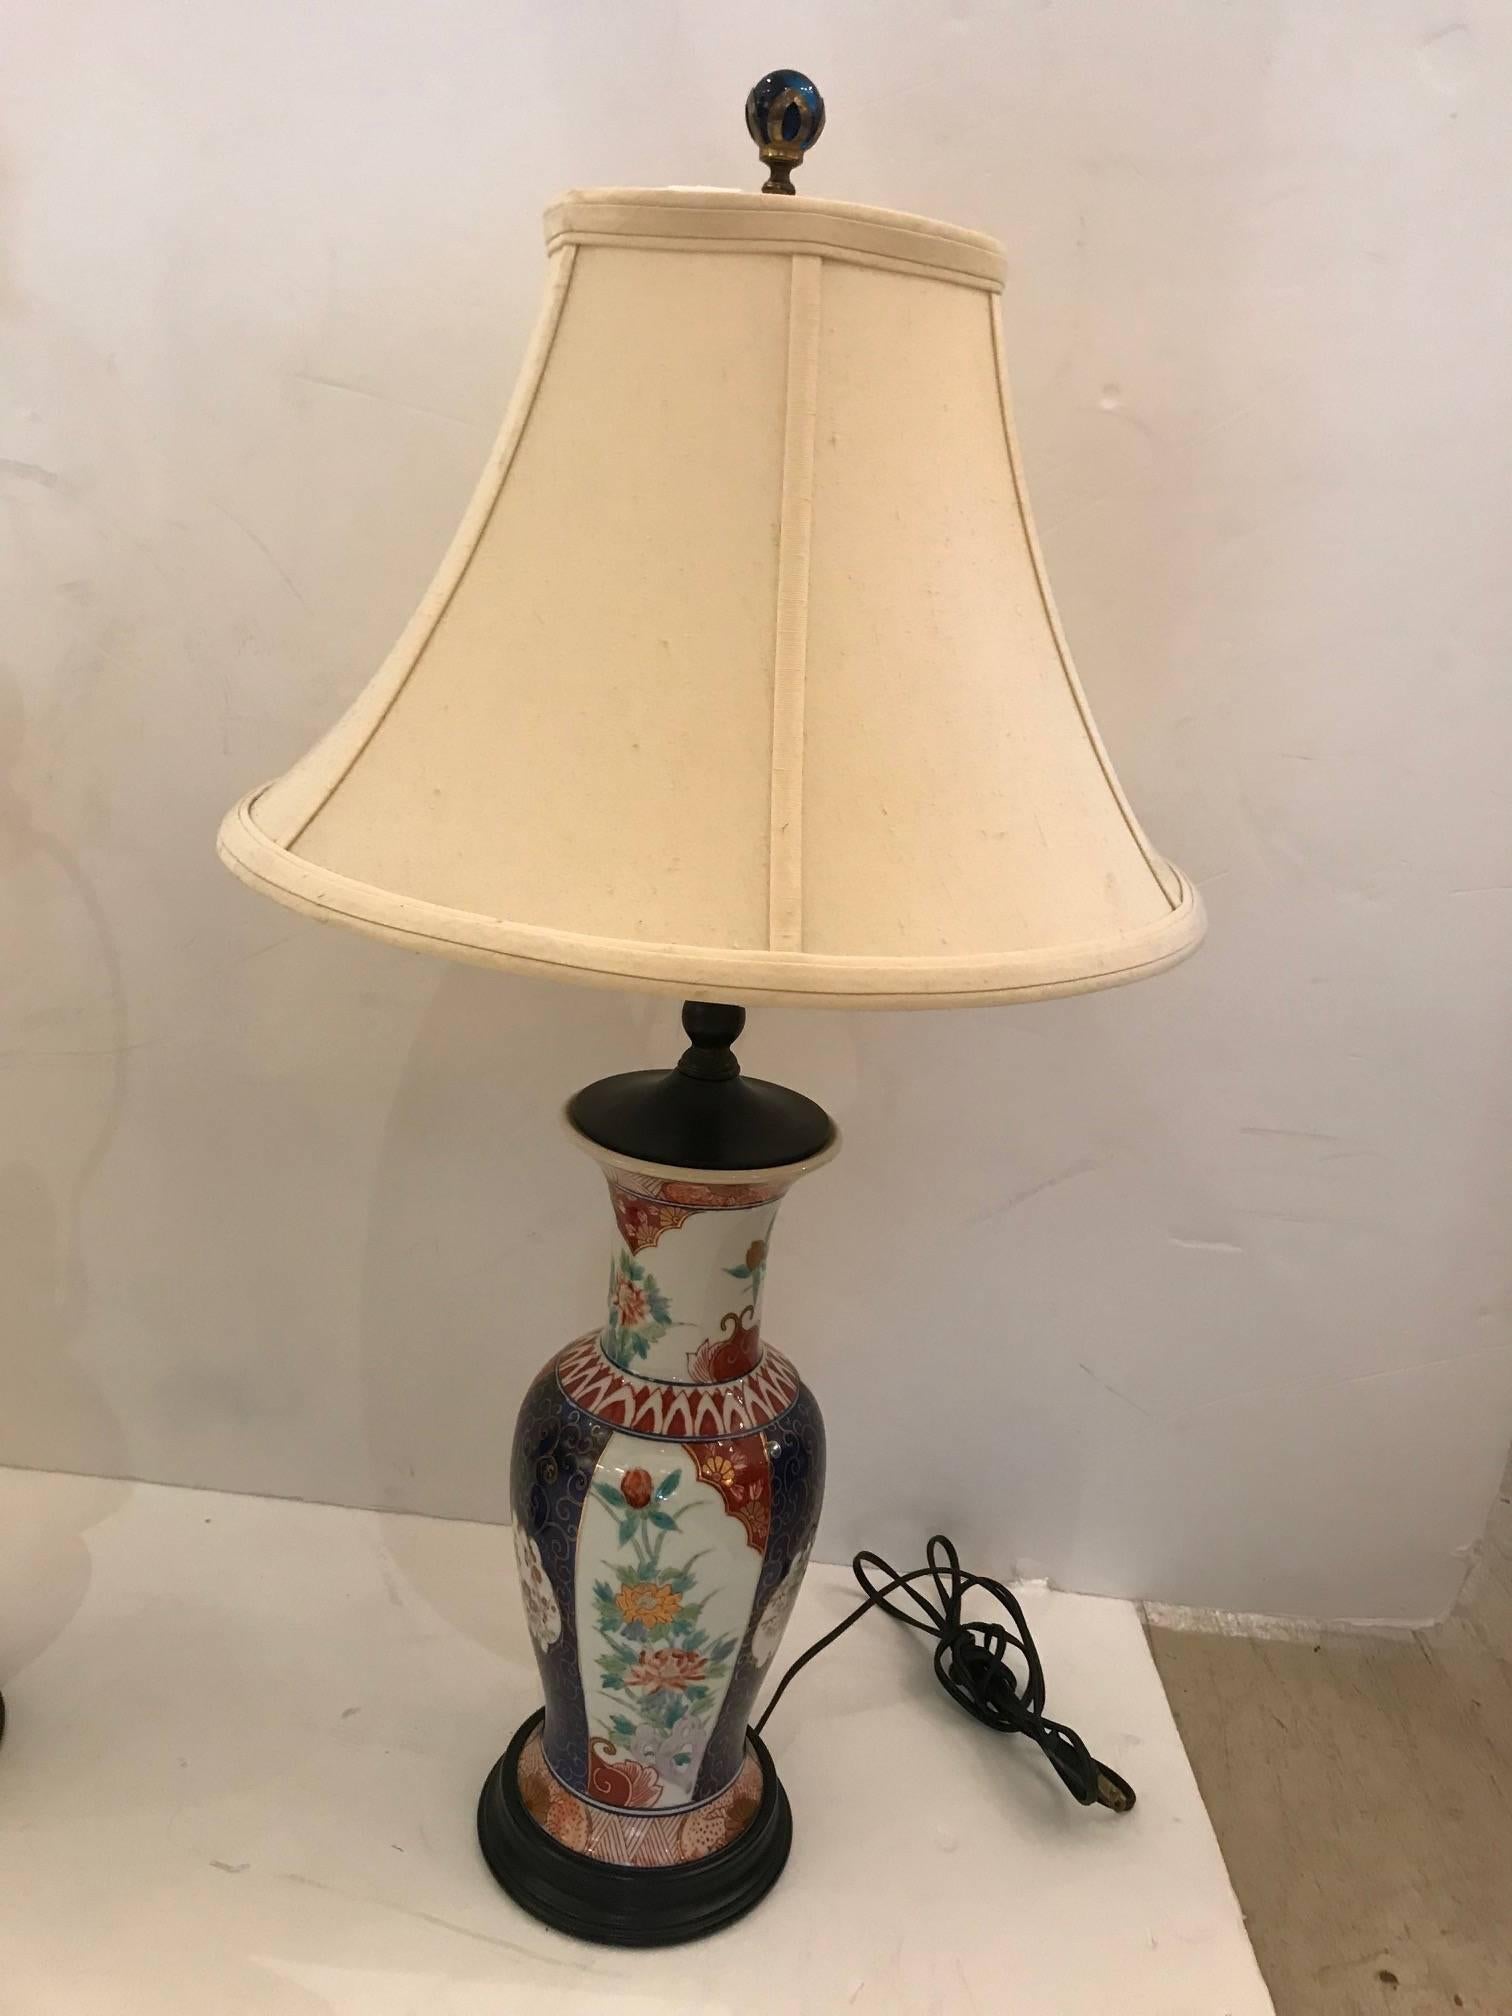 Very elegant pair of antique Imari table lamps having vase shaped bases adorned with beautiful patterns of flowers in green cream and cinnarbar, with gold curlicues against a striking saffire blue. The bases are wood, 7 inches round, and the finials